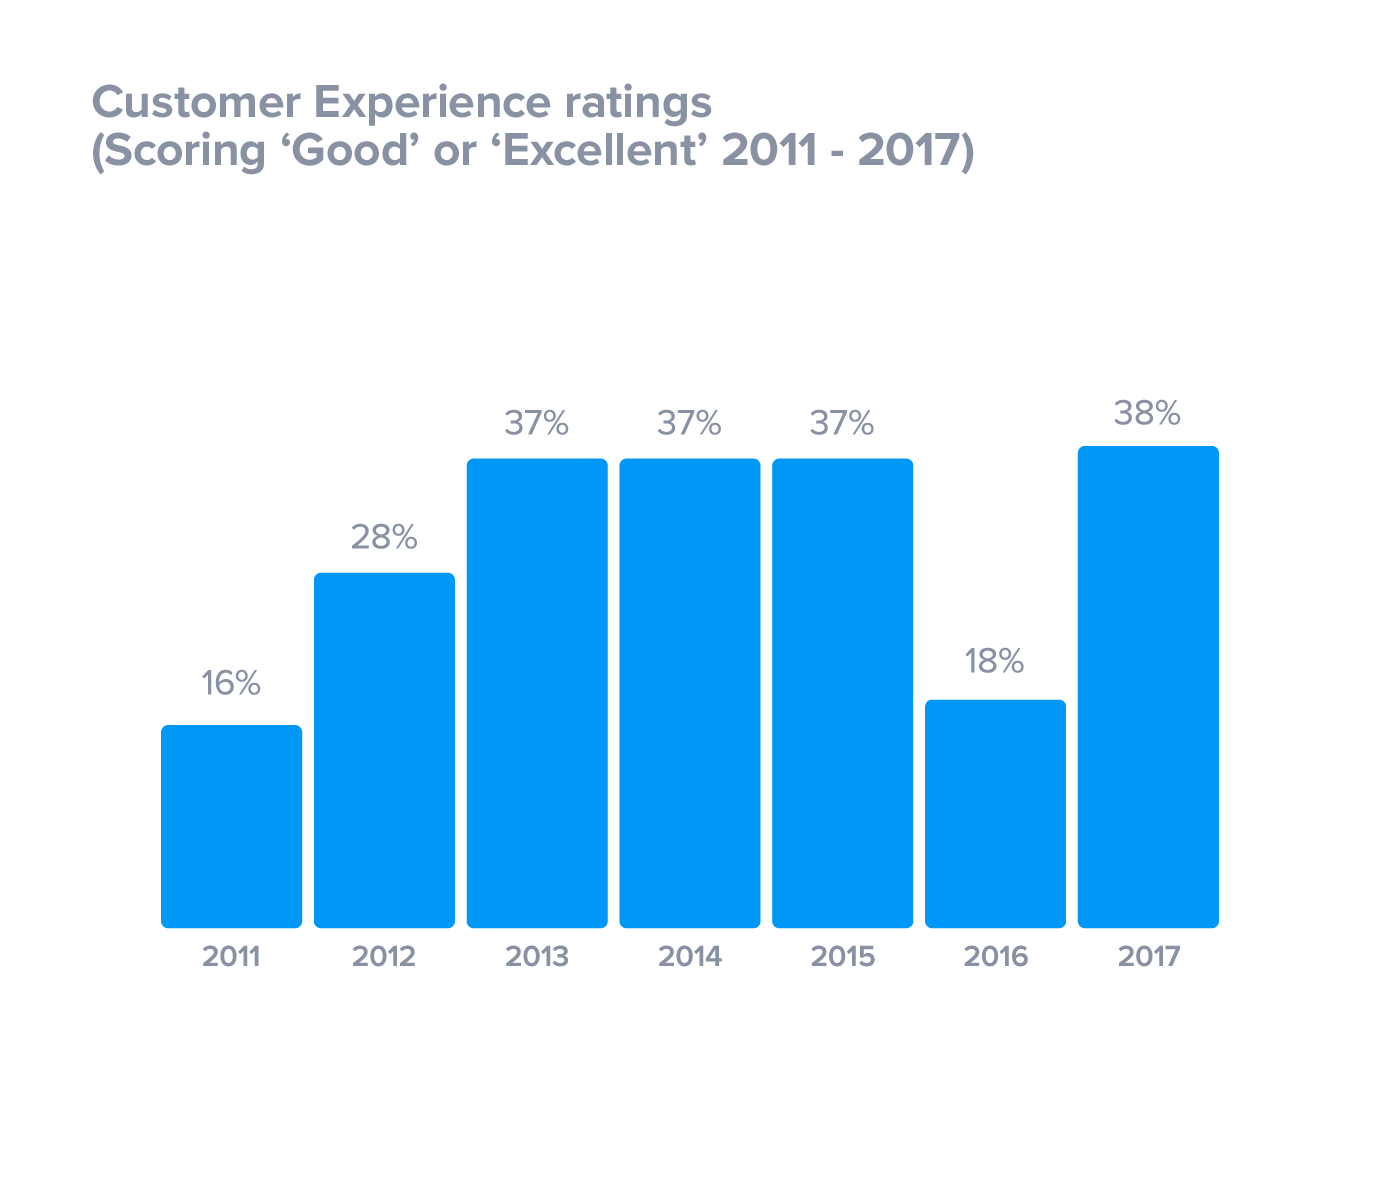 Customer Experience Ratings 2011 to 2017